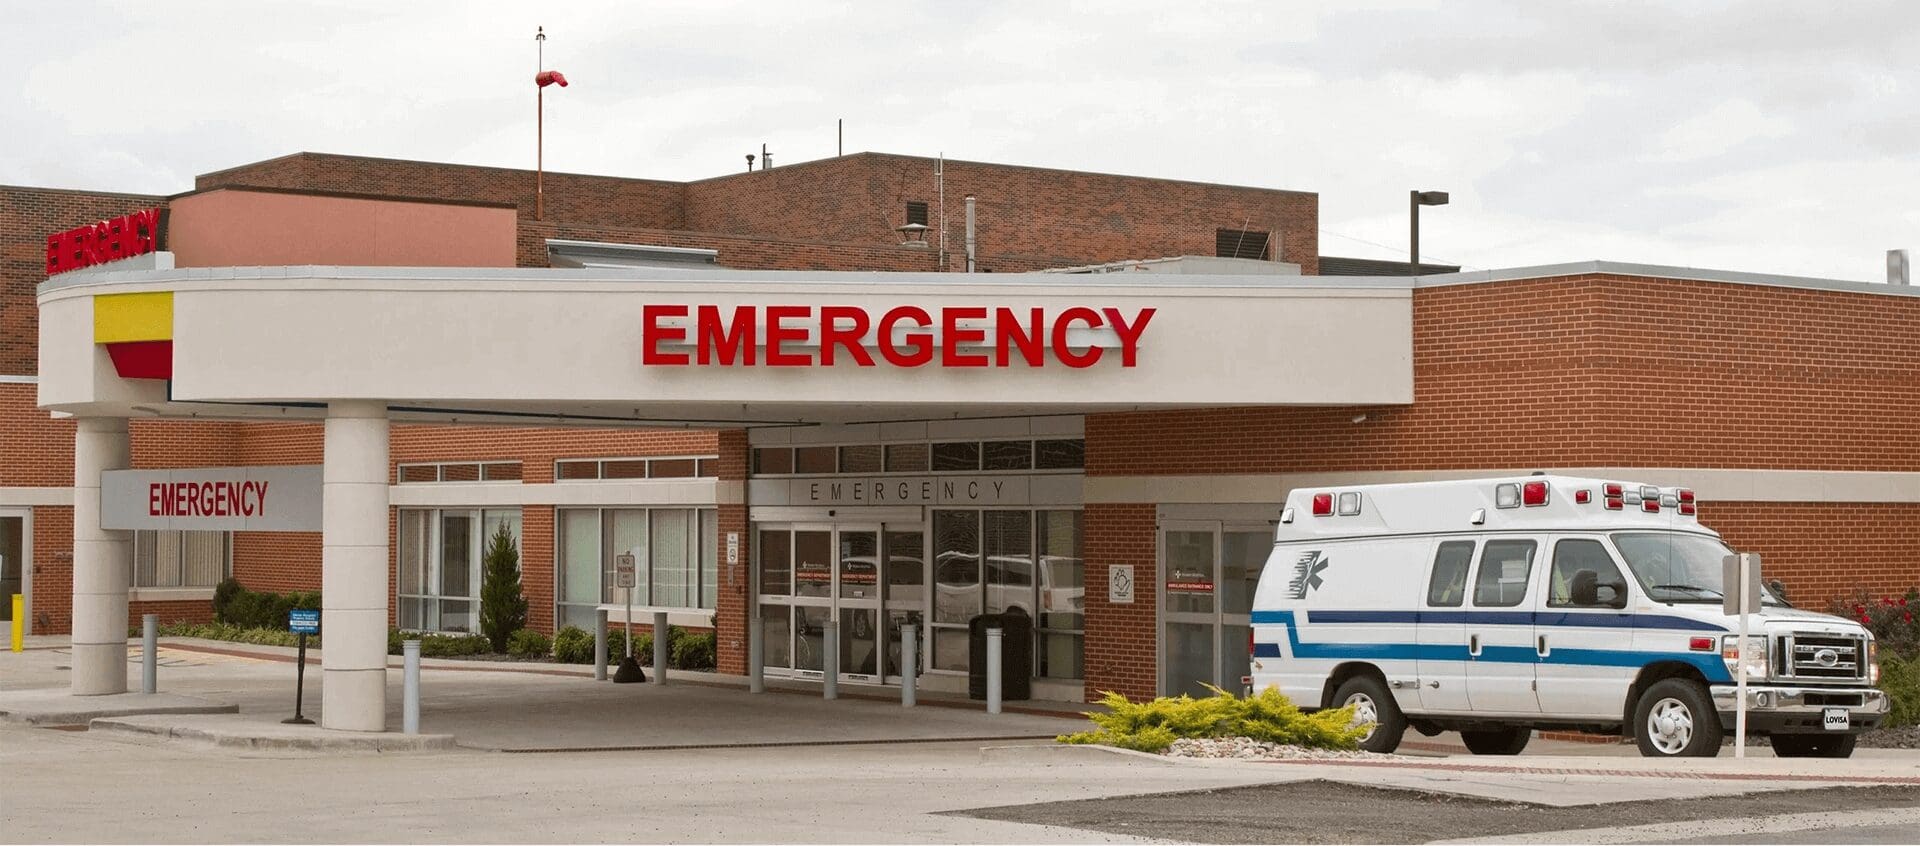 A hospital emergency room with an ambulance parked outside.